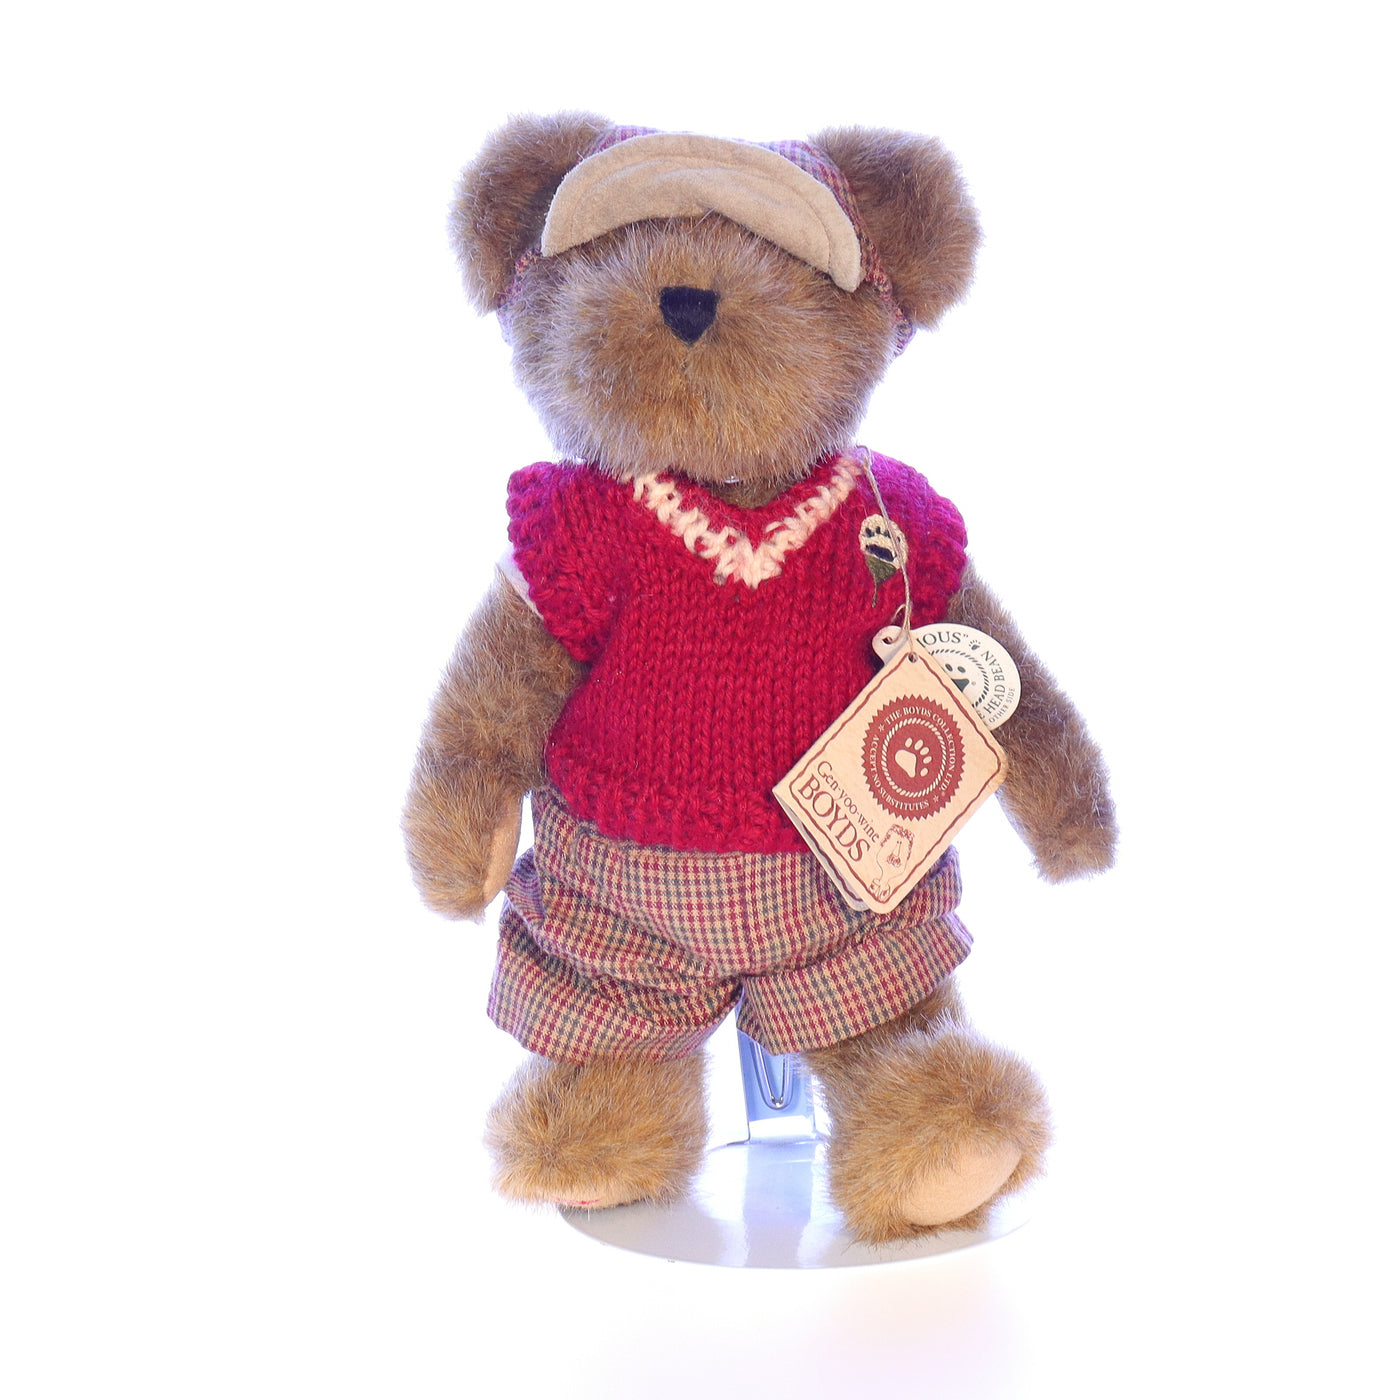 Boyds_Bears_and_Friends_918339_Putter_T_Parfore_TJs_Best_Dressed_Stuffed_Animal_1988 Front View